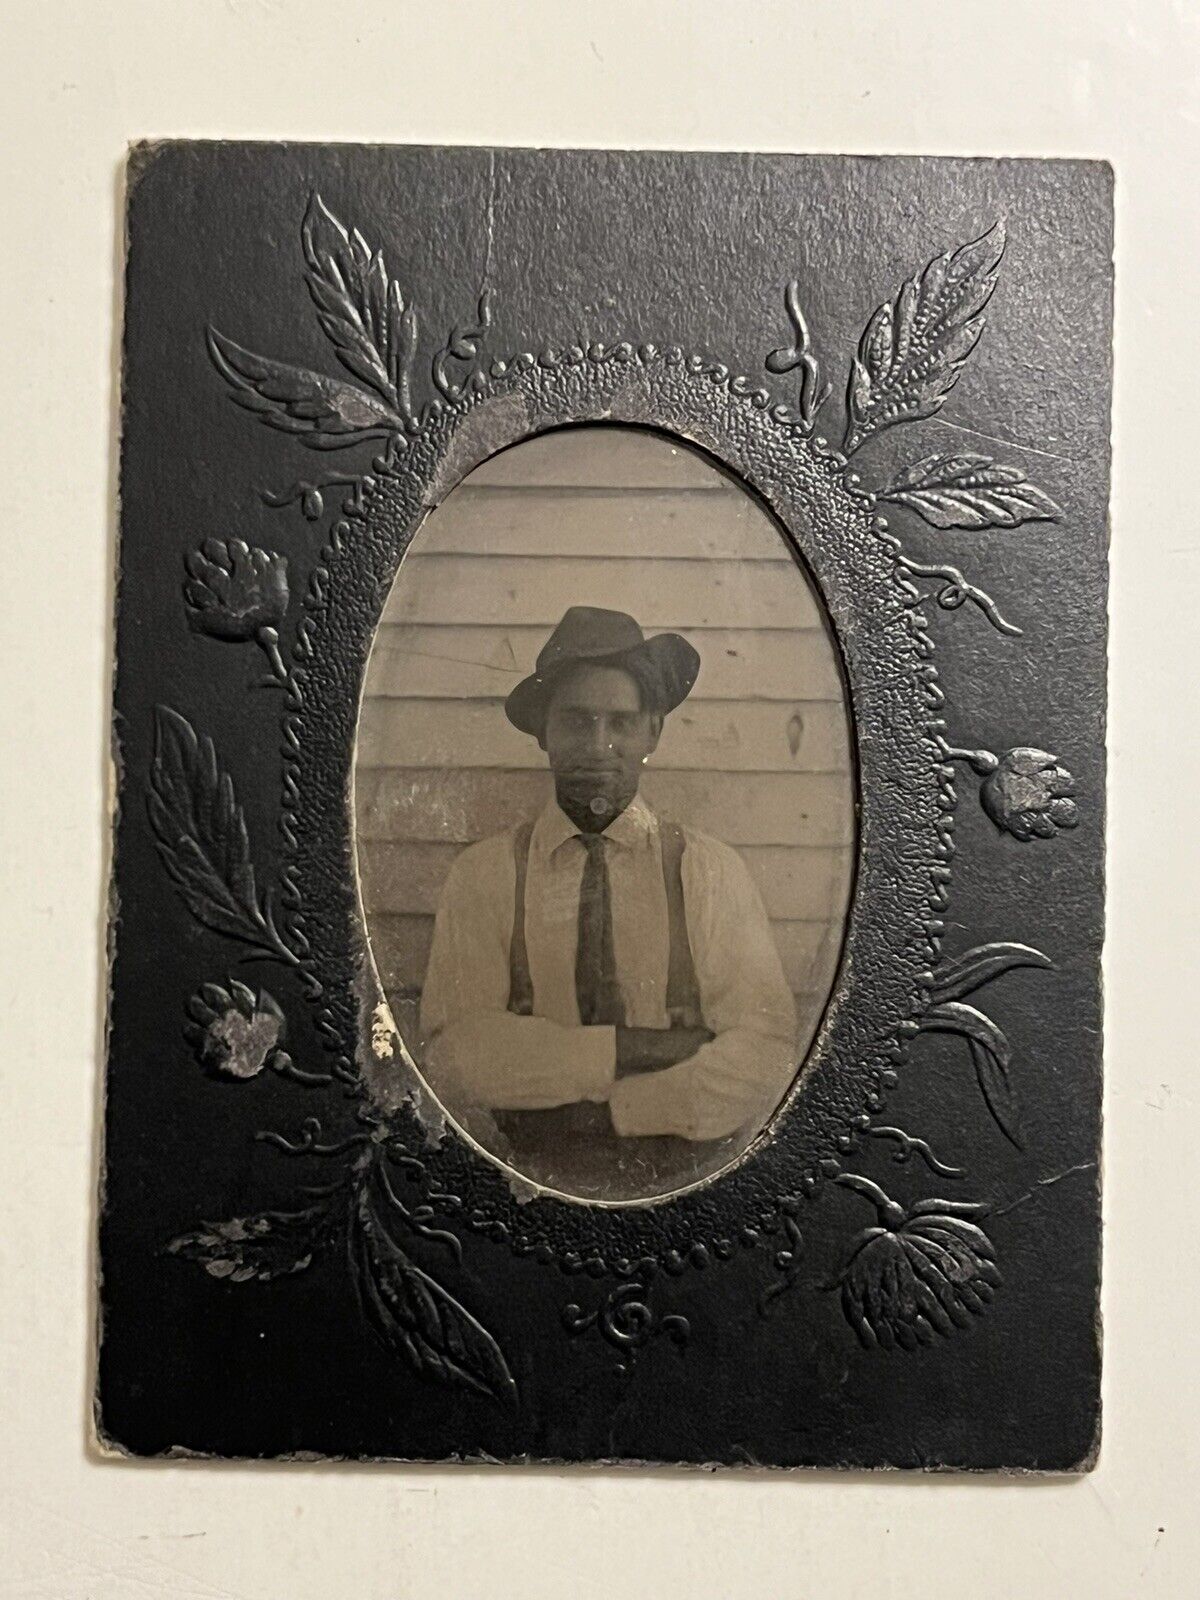 Vintage Tintype Photo of Man with Hat and Tie Posing Outside Portrait